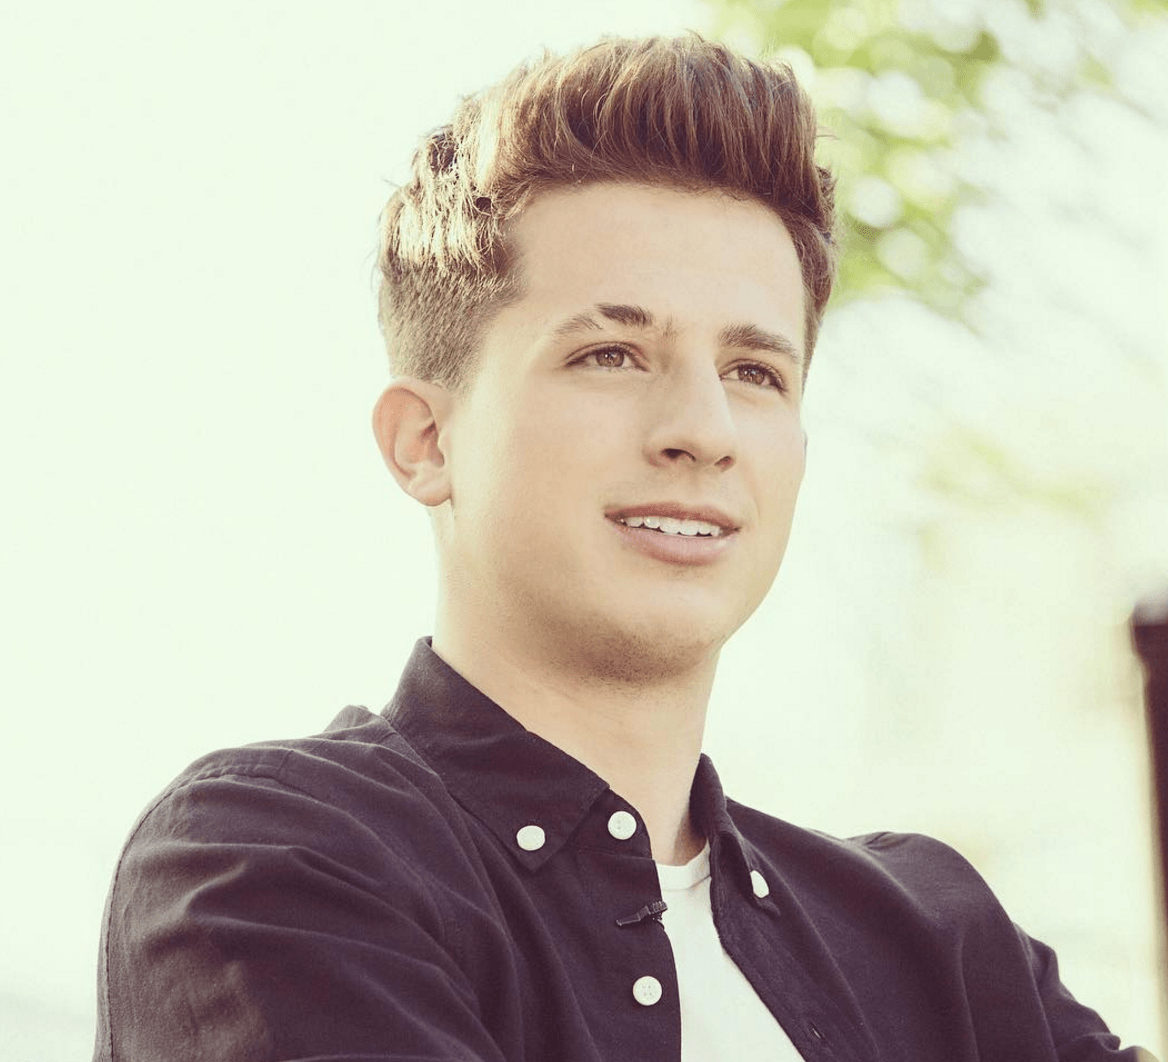 Charlie Puth Image. Full HD Picture